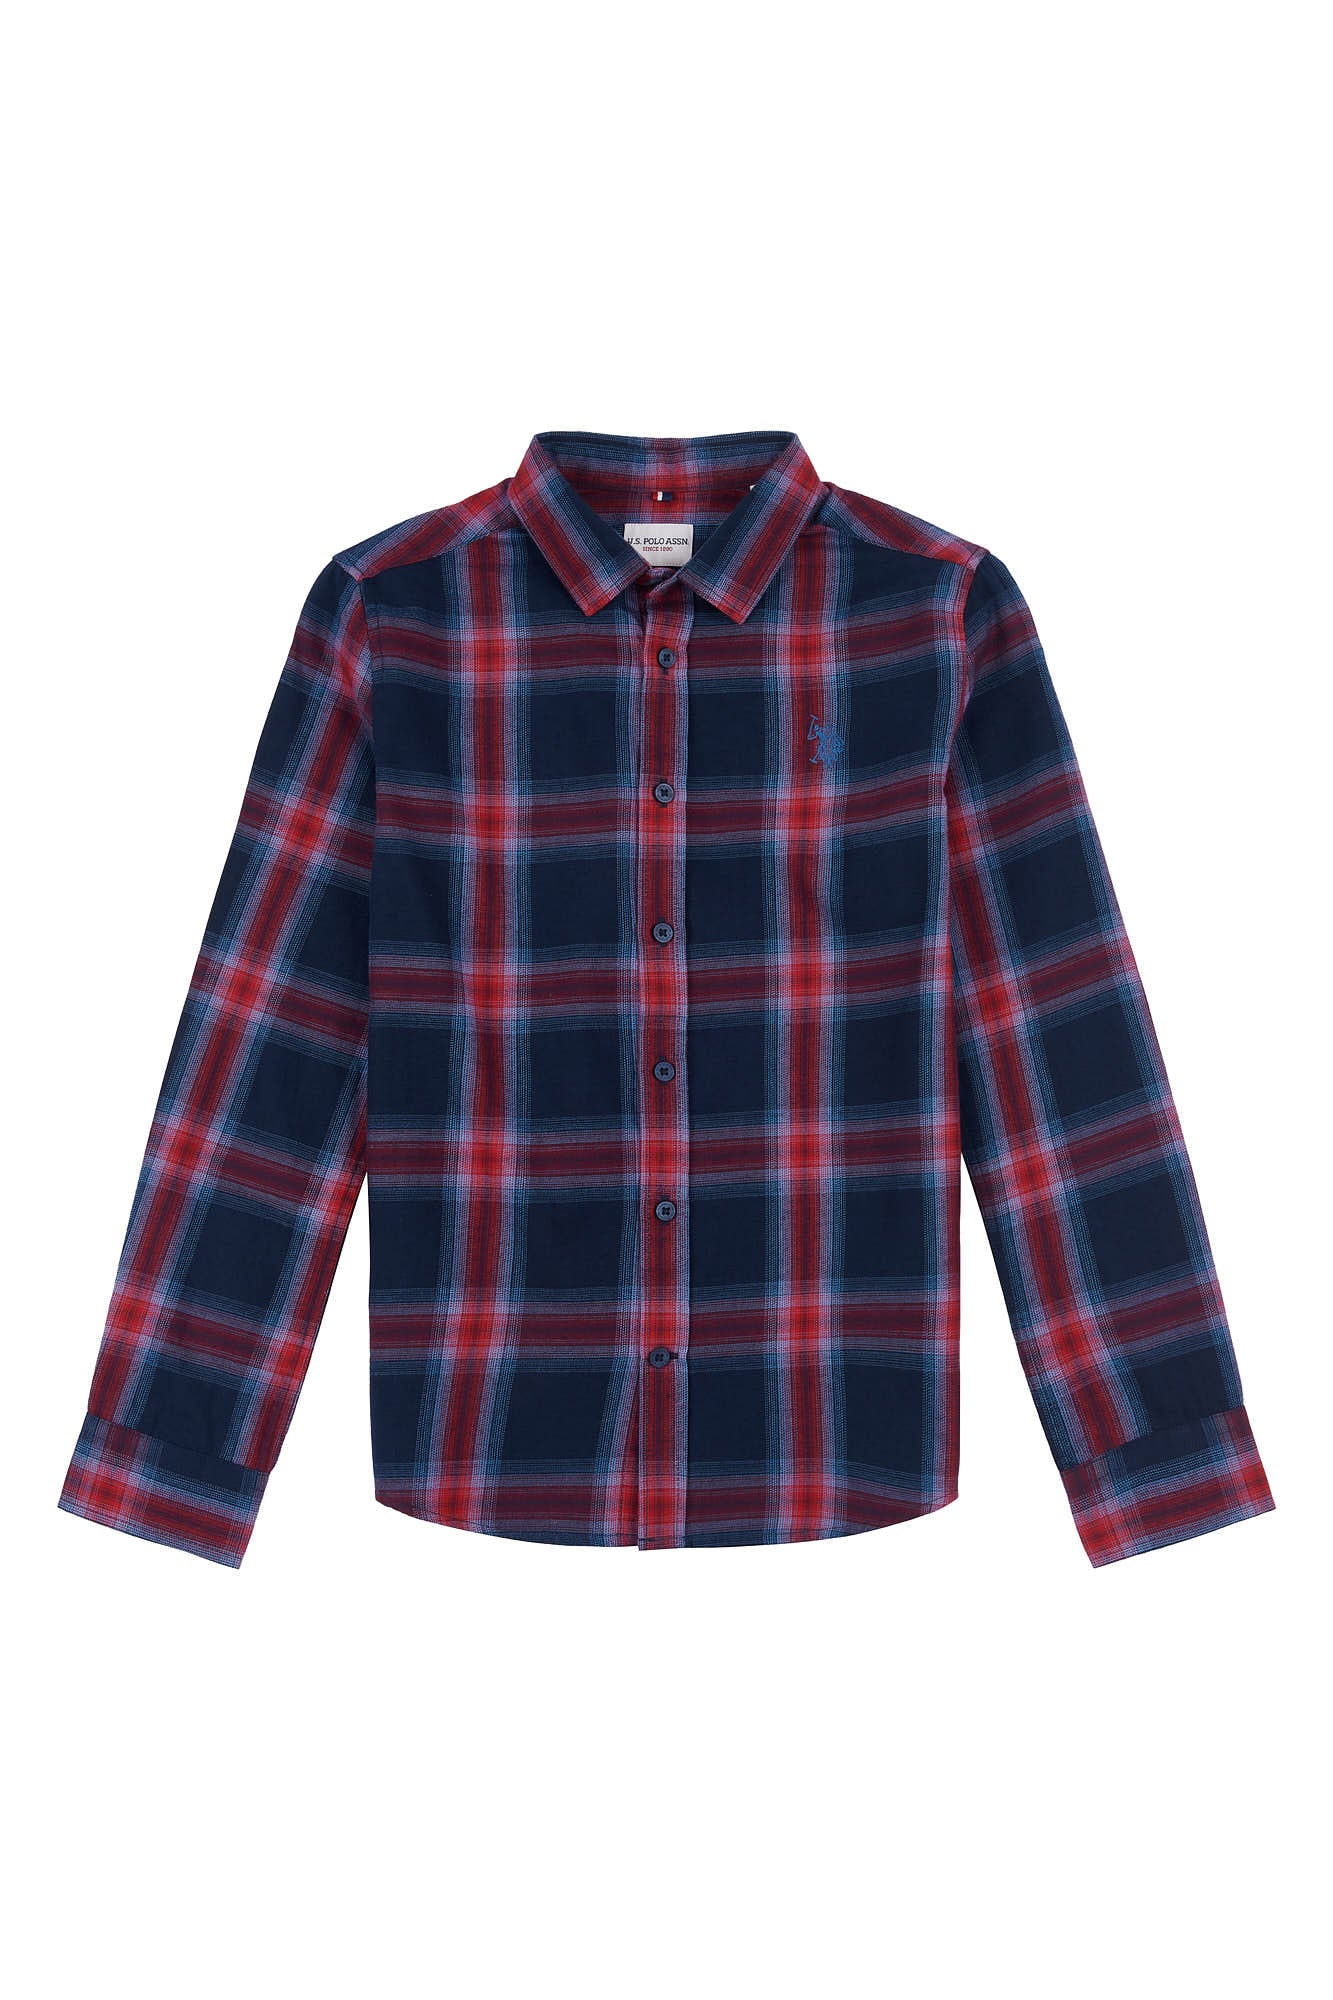 Boys Ombre Brushed Stripe Overshirt in Navy Blue